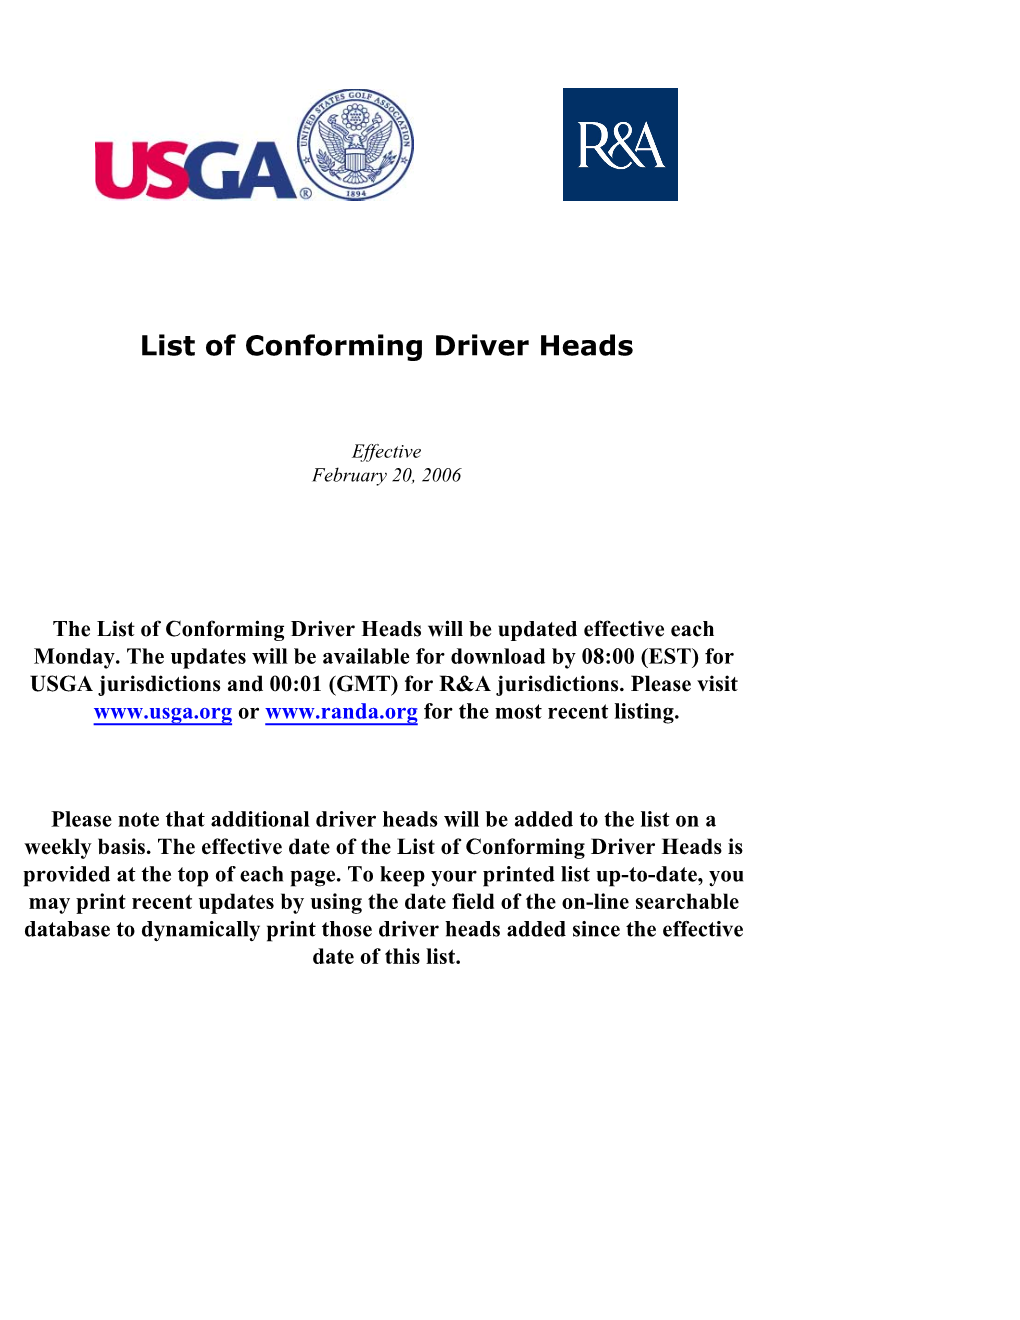 The List of Conforming Driver Heads Will Be Updated Effective Each Monday